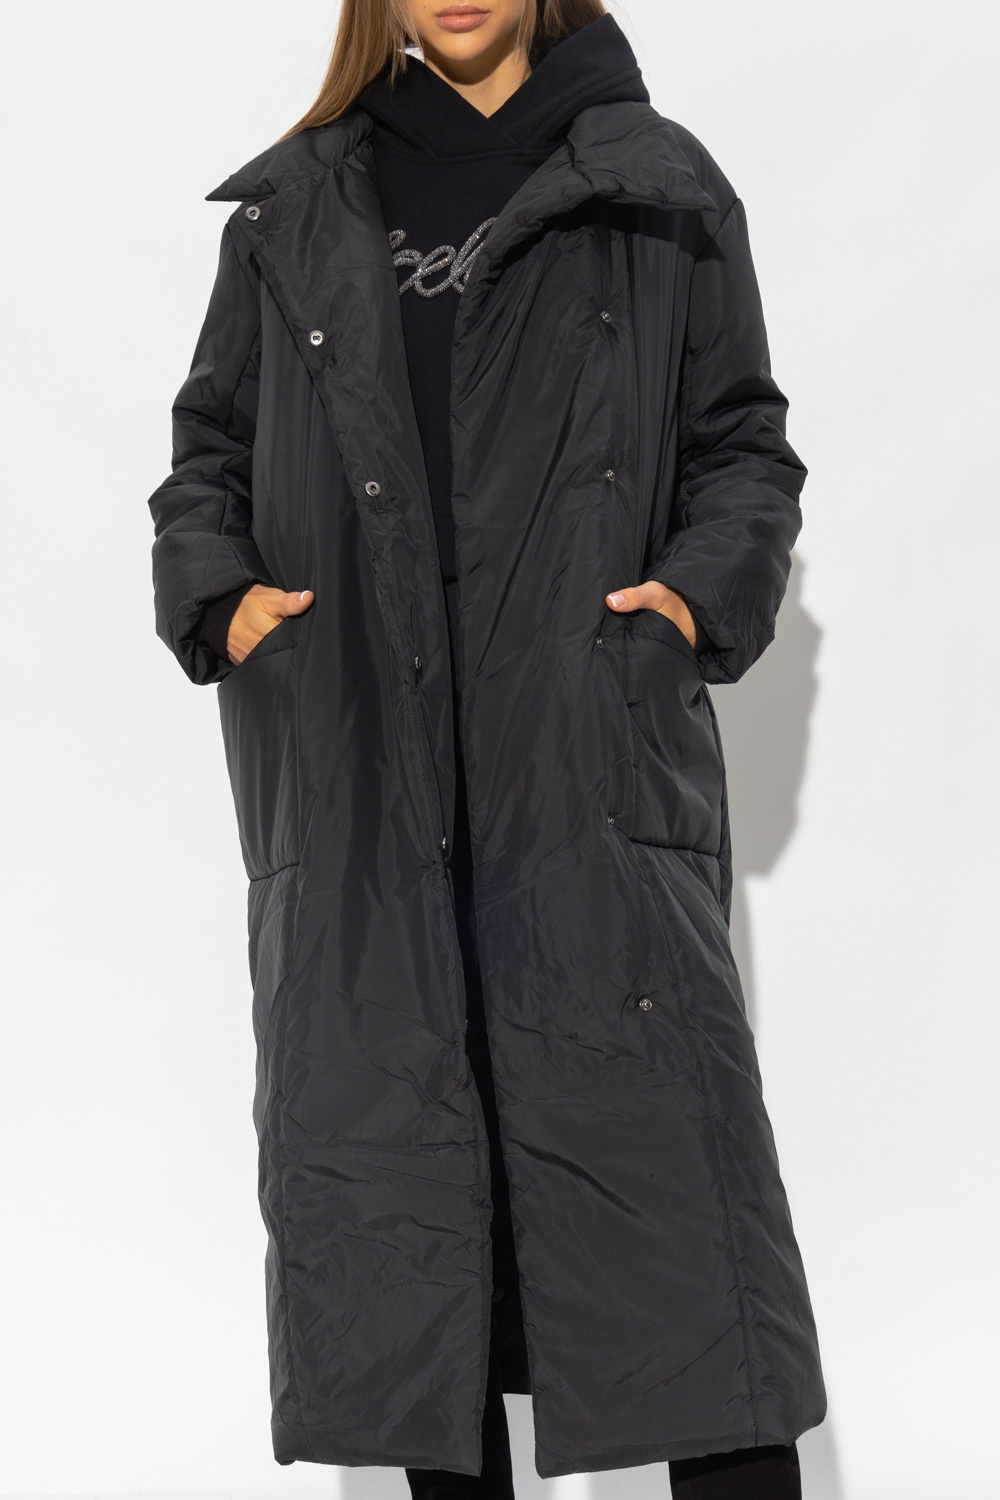 Discover our suggestions ‘Emilia’ insulated coat